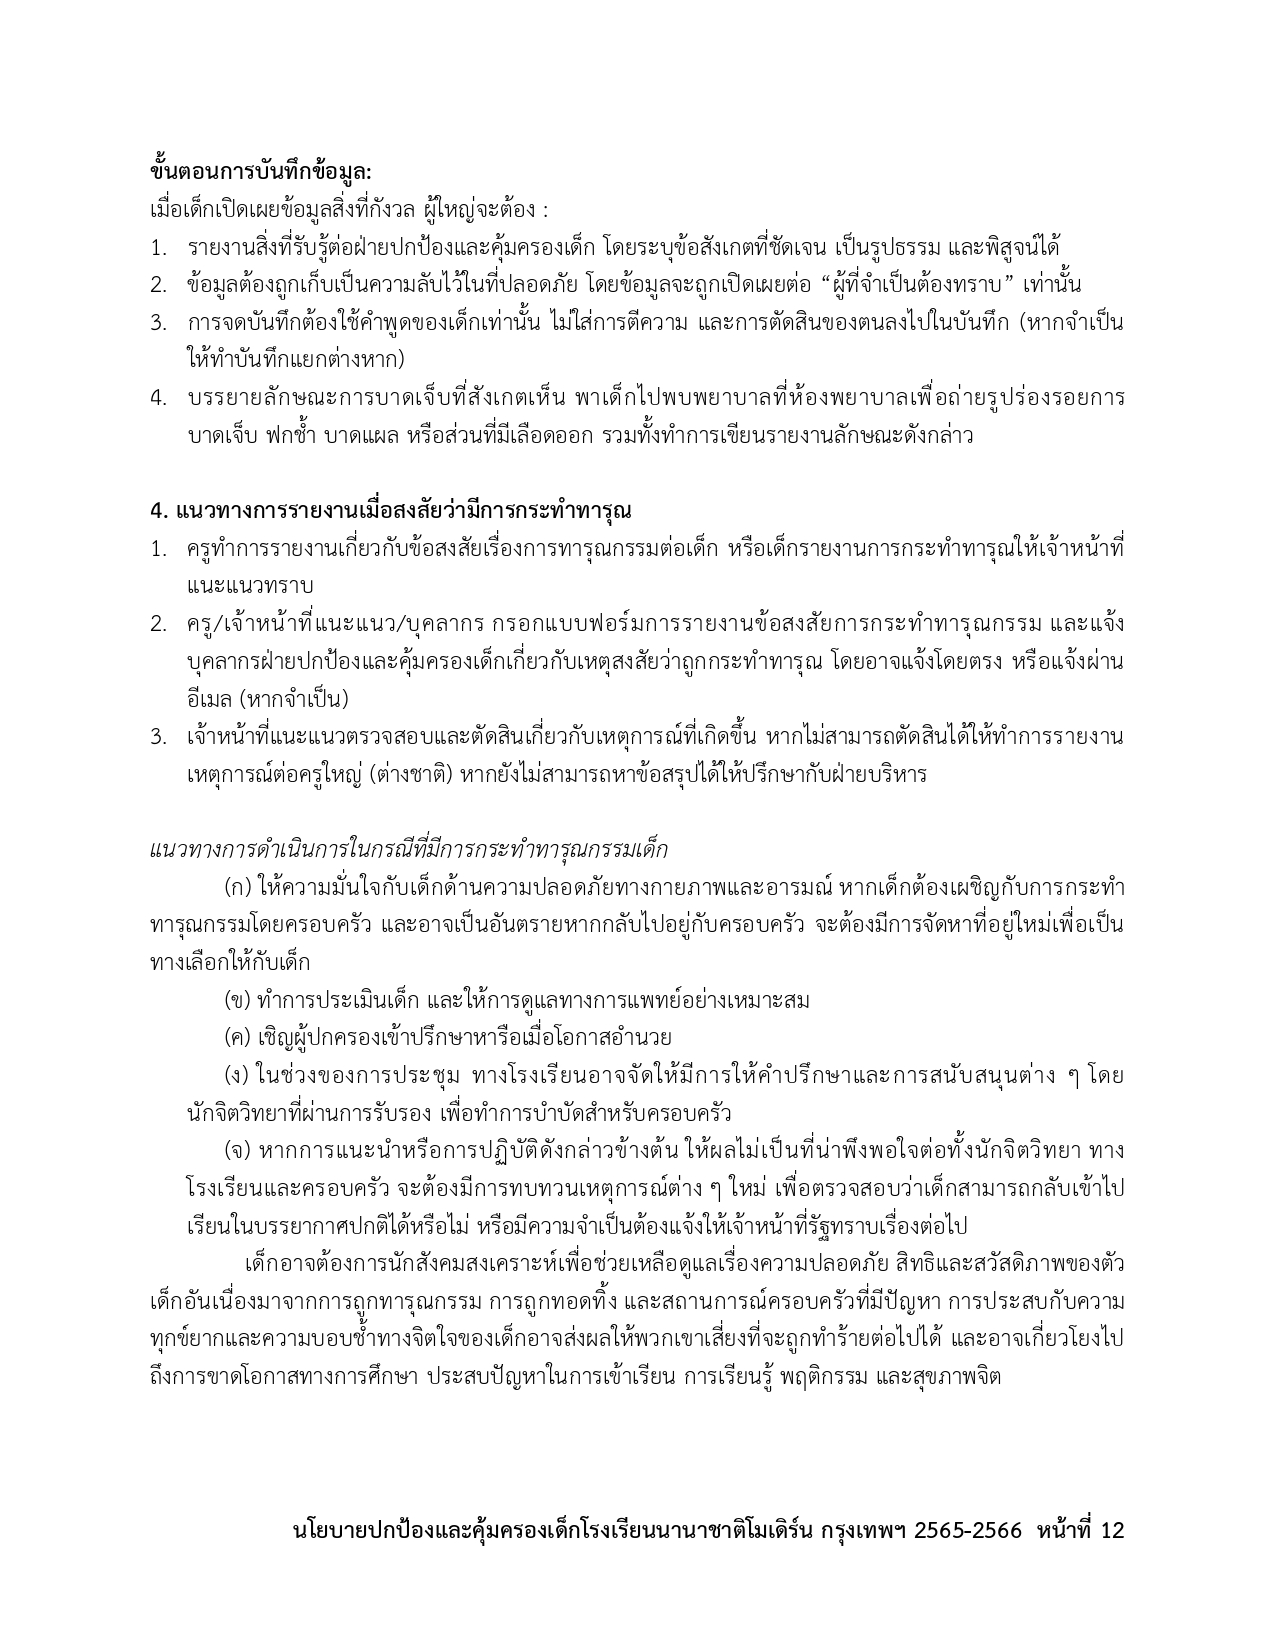 Child Protection Policy Thai Version page 0012